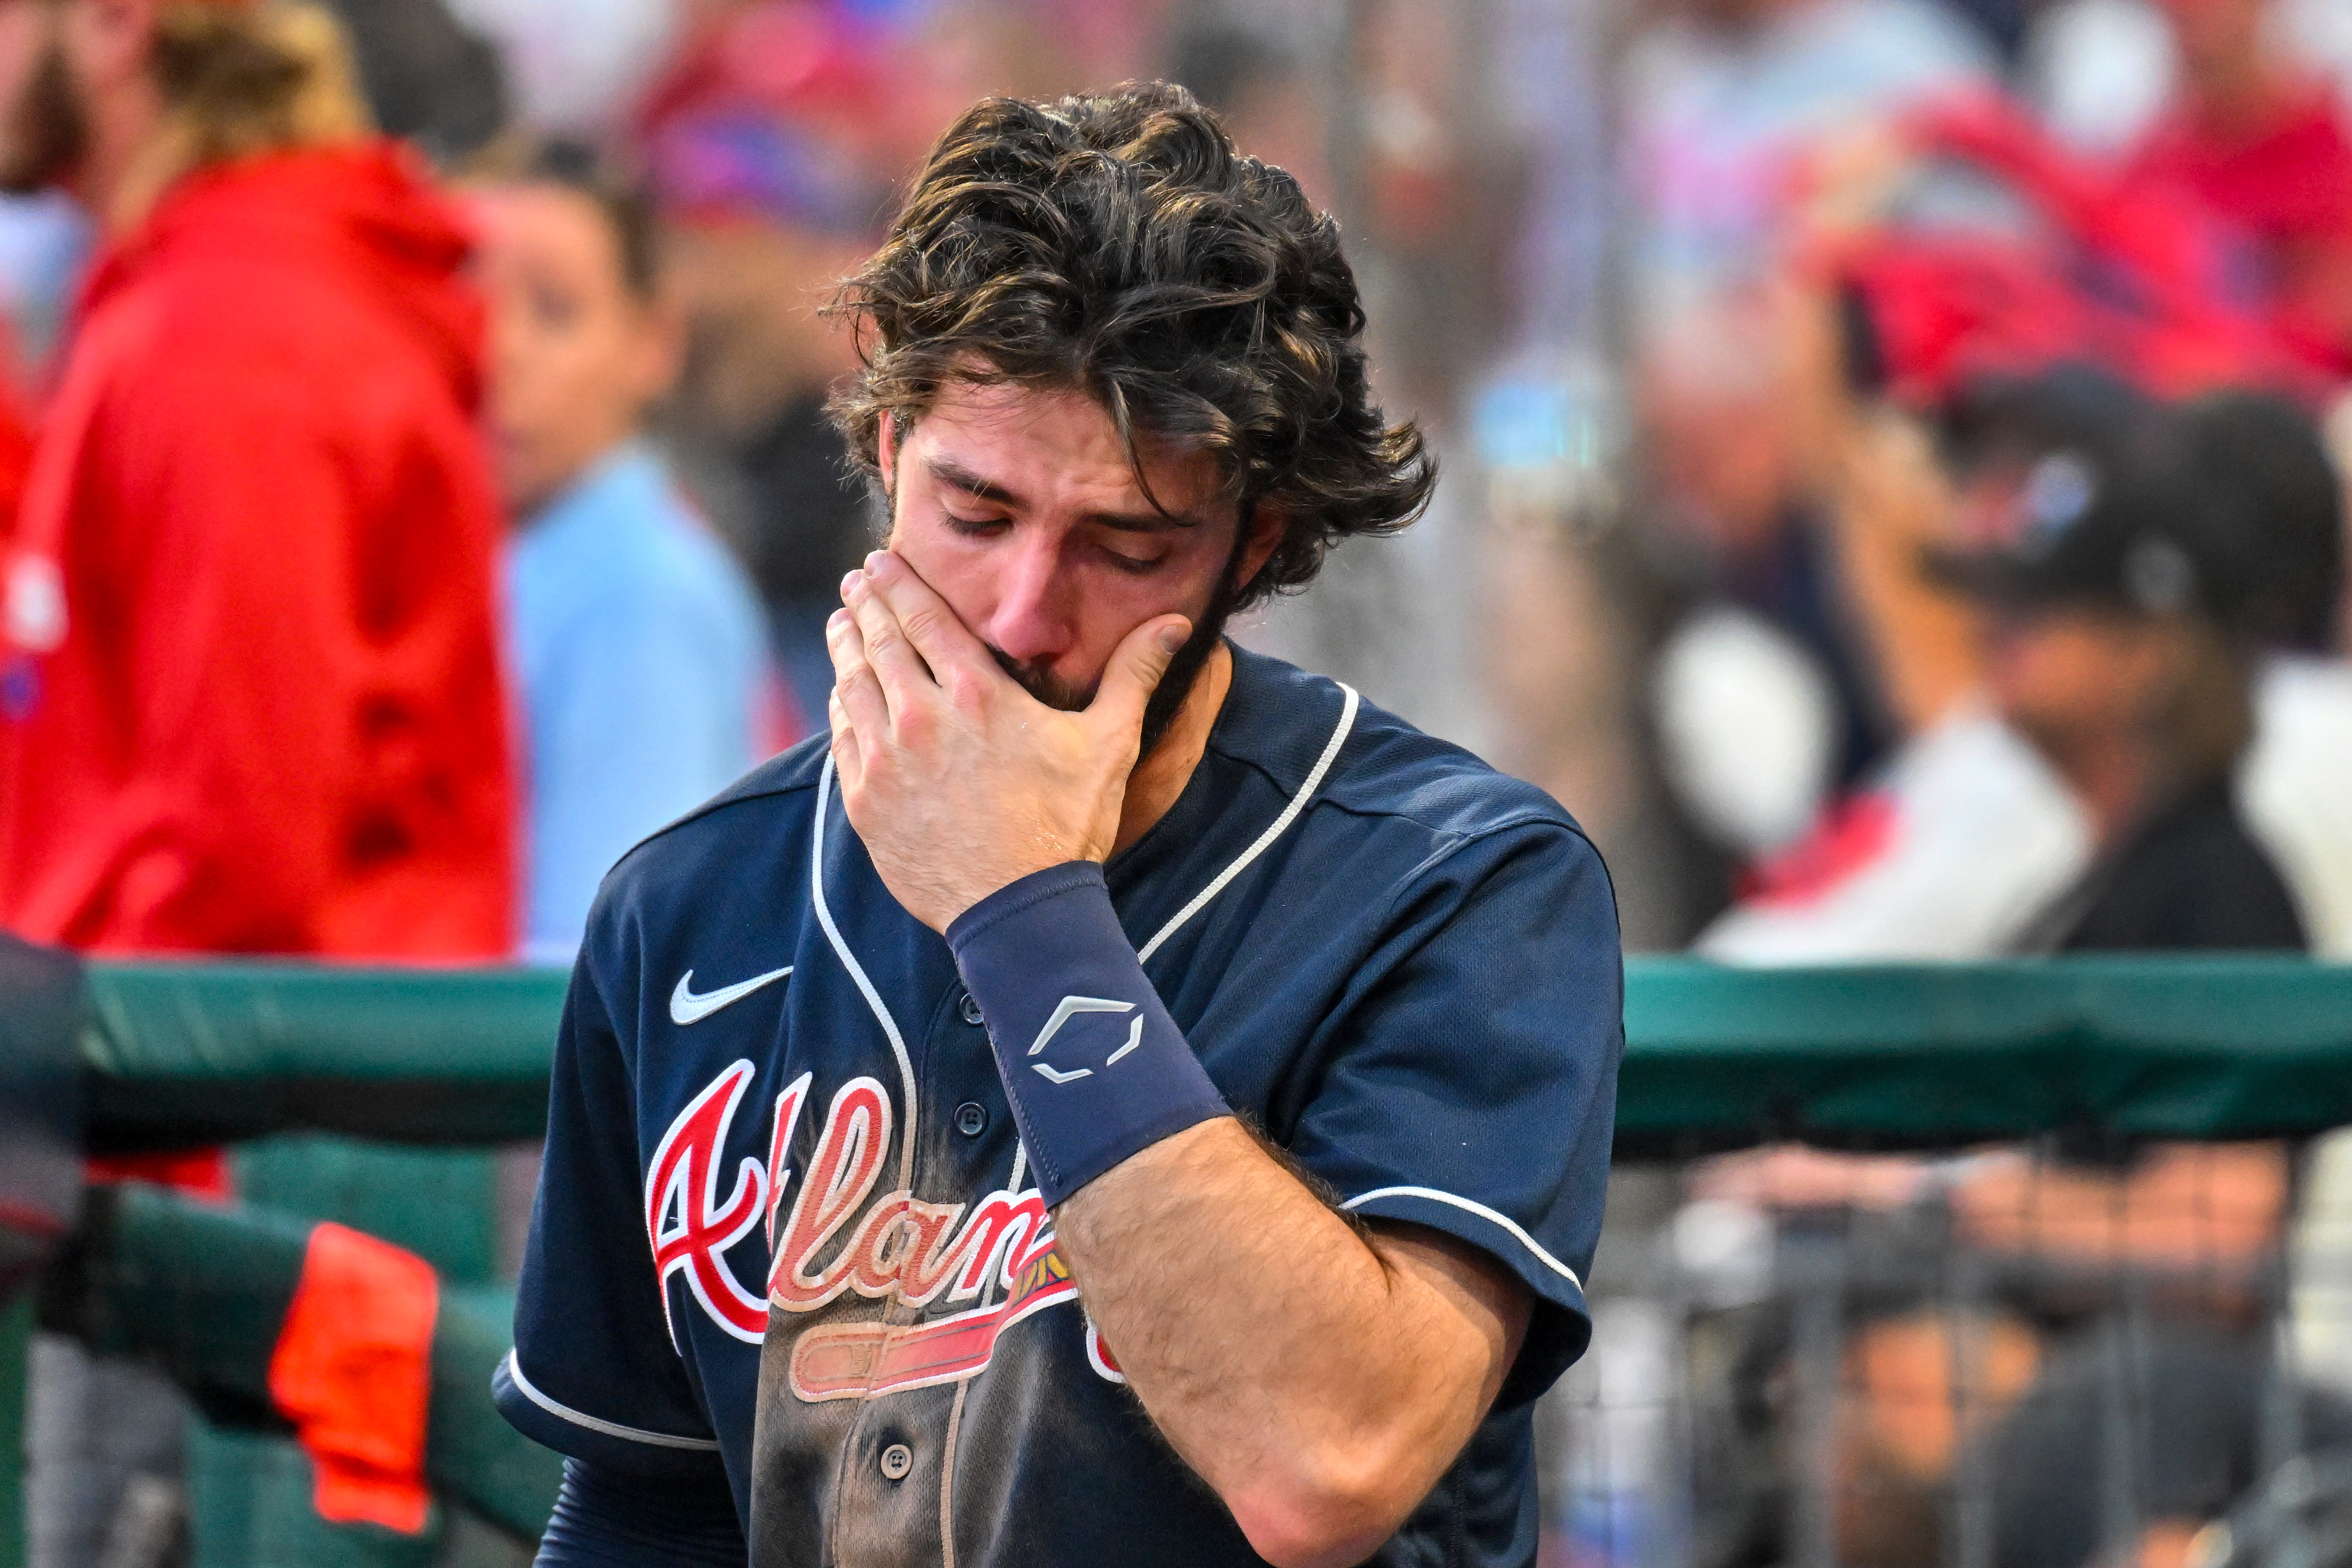 Championship hopes dashed as Braves fall to Phillies in NLDS